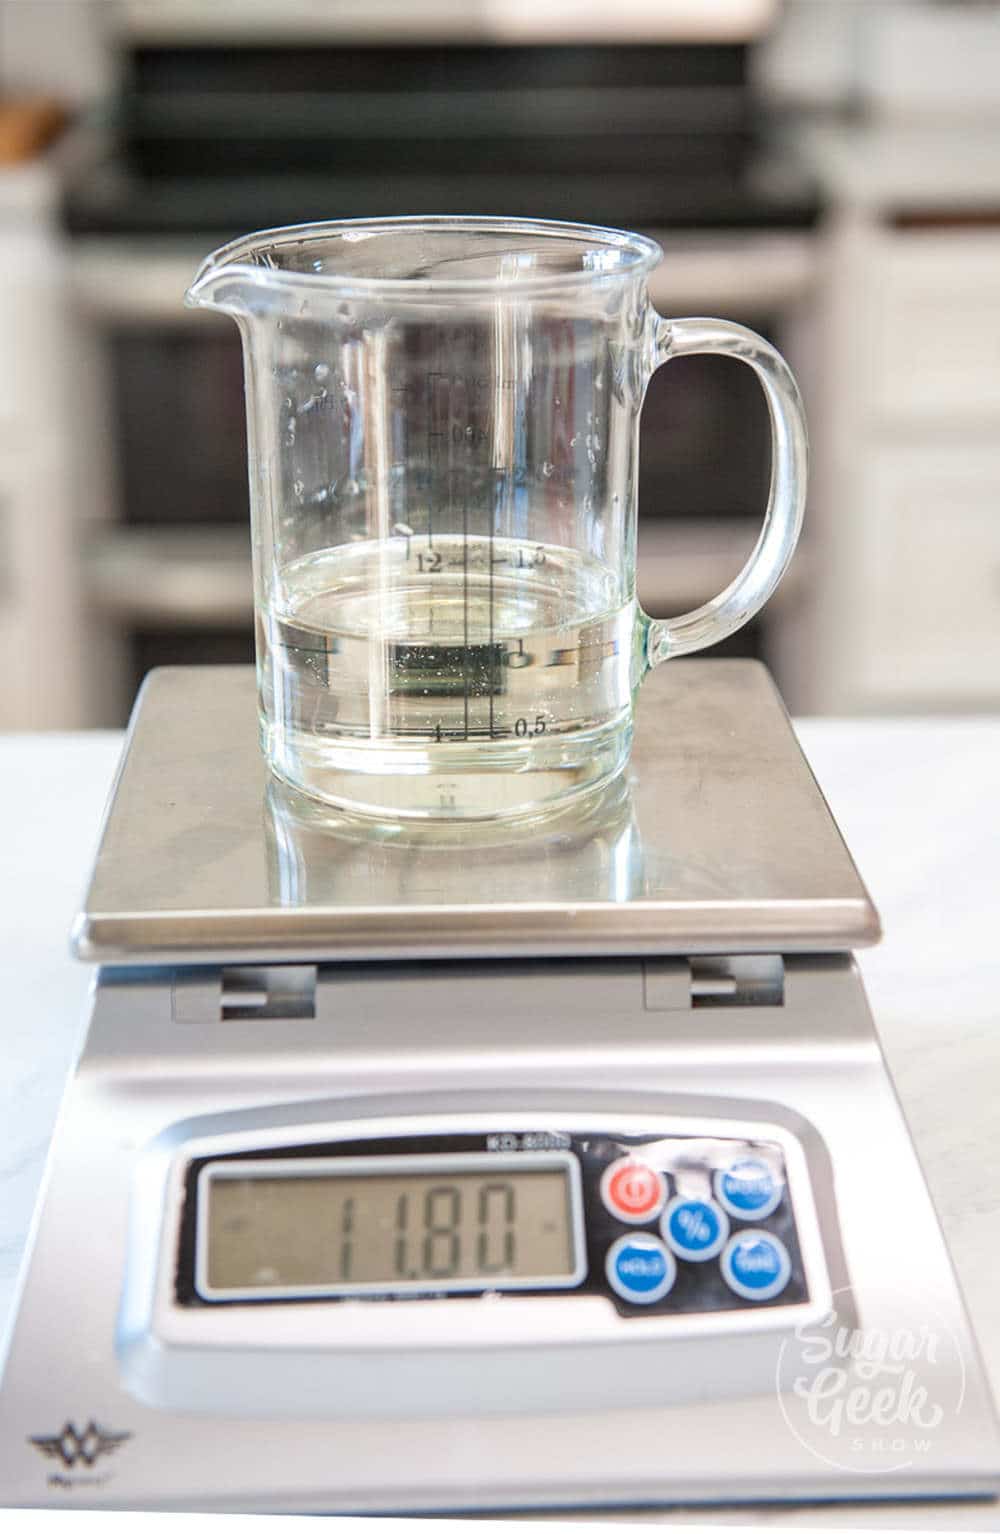 How To Use A Digital Kitchen Scale For Baking Sugar Geek Show